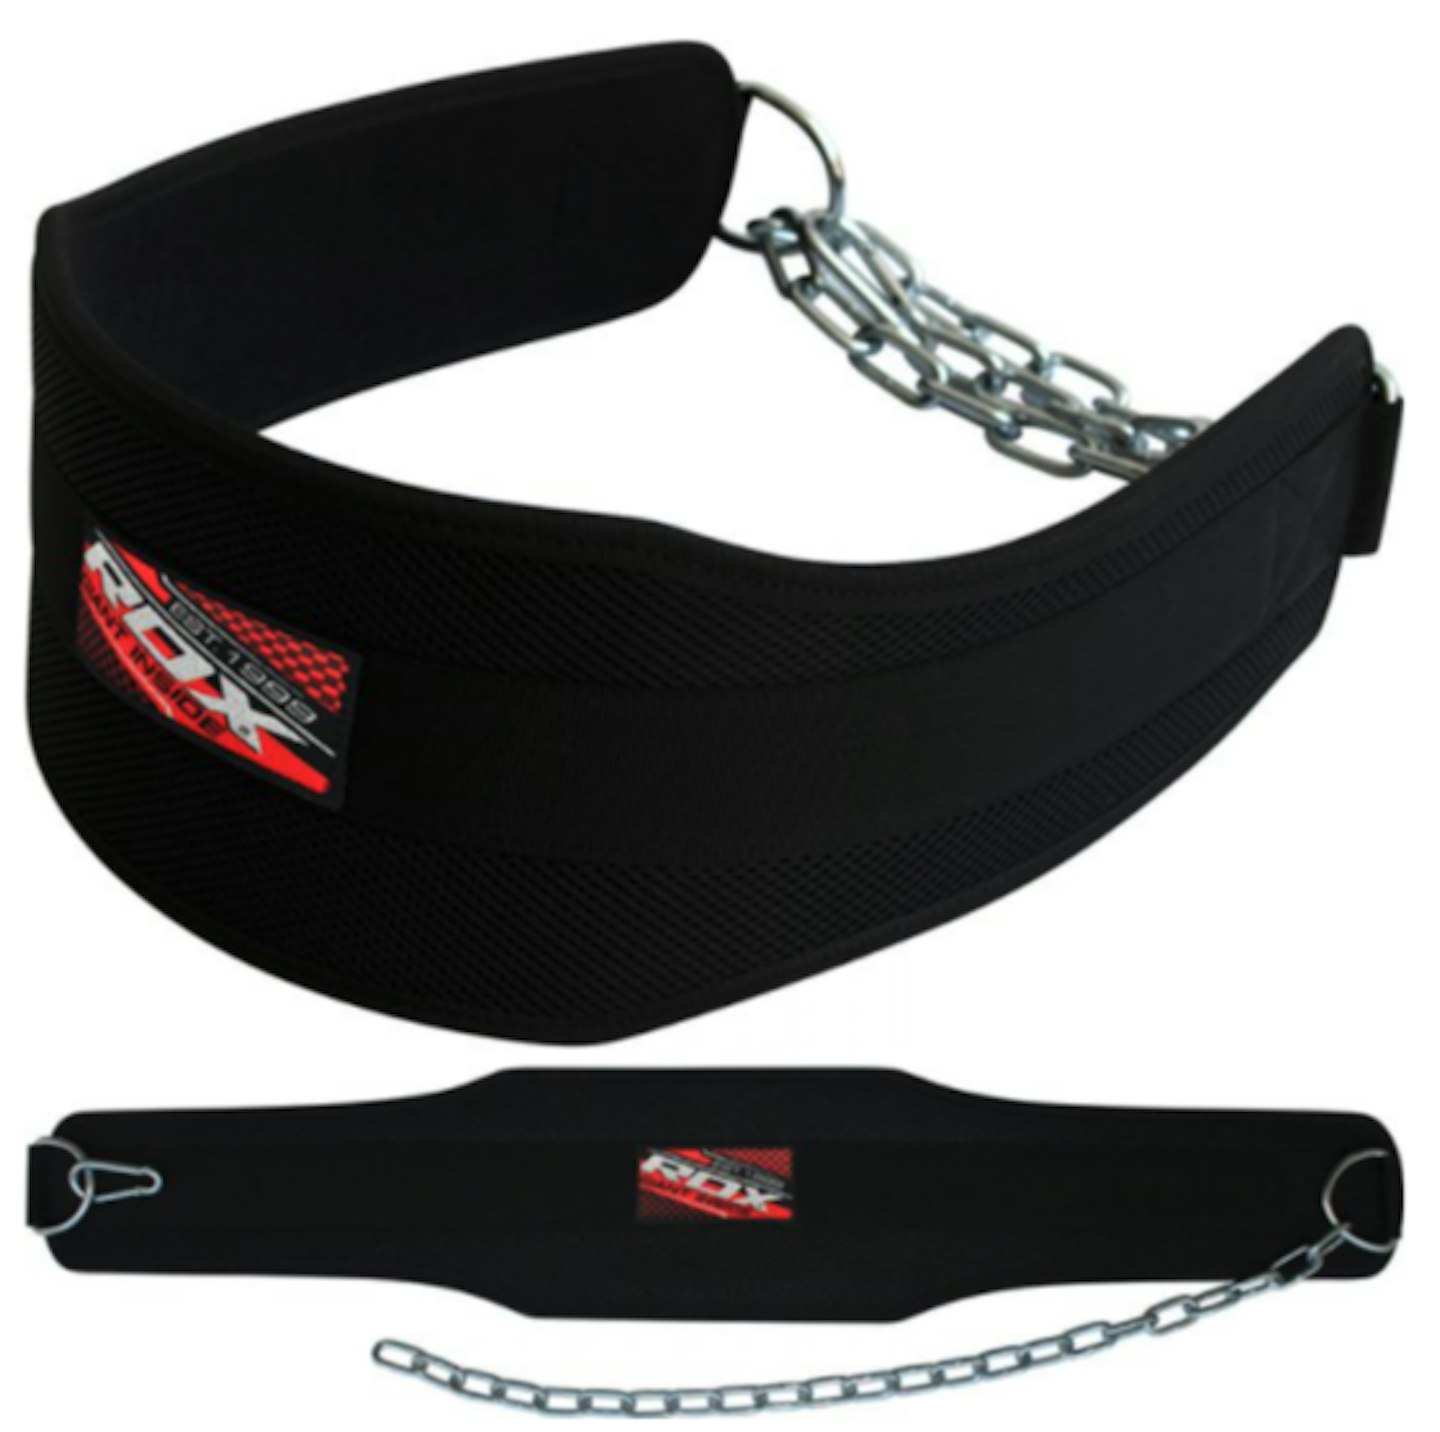 RDX weight belt with chain